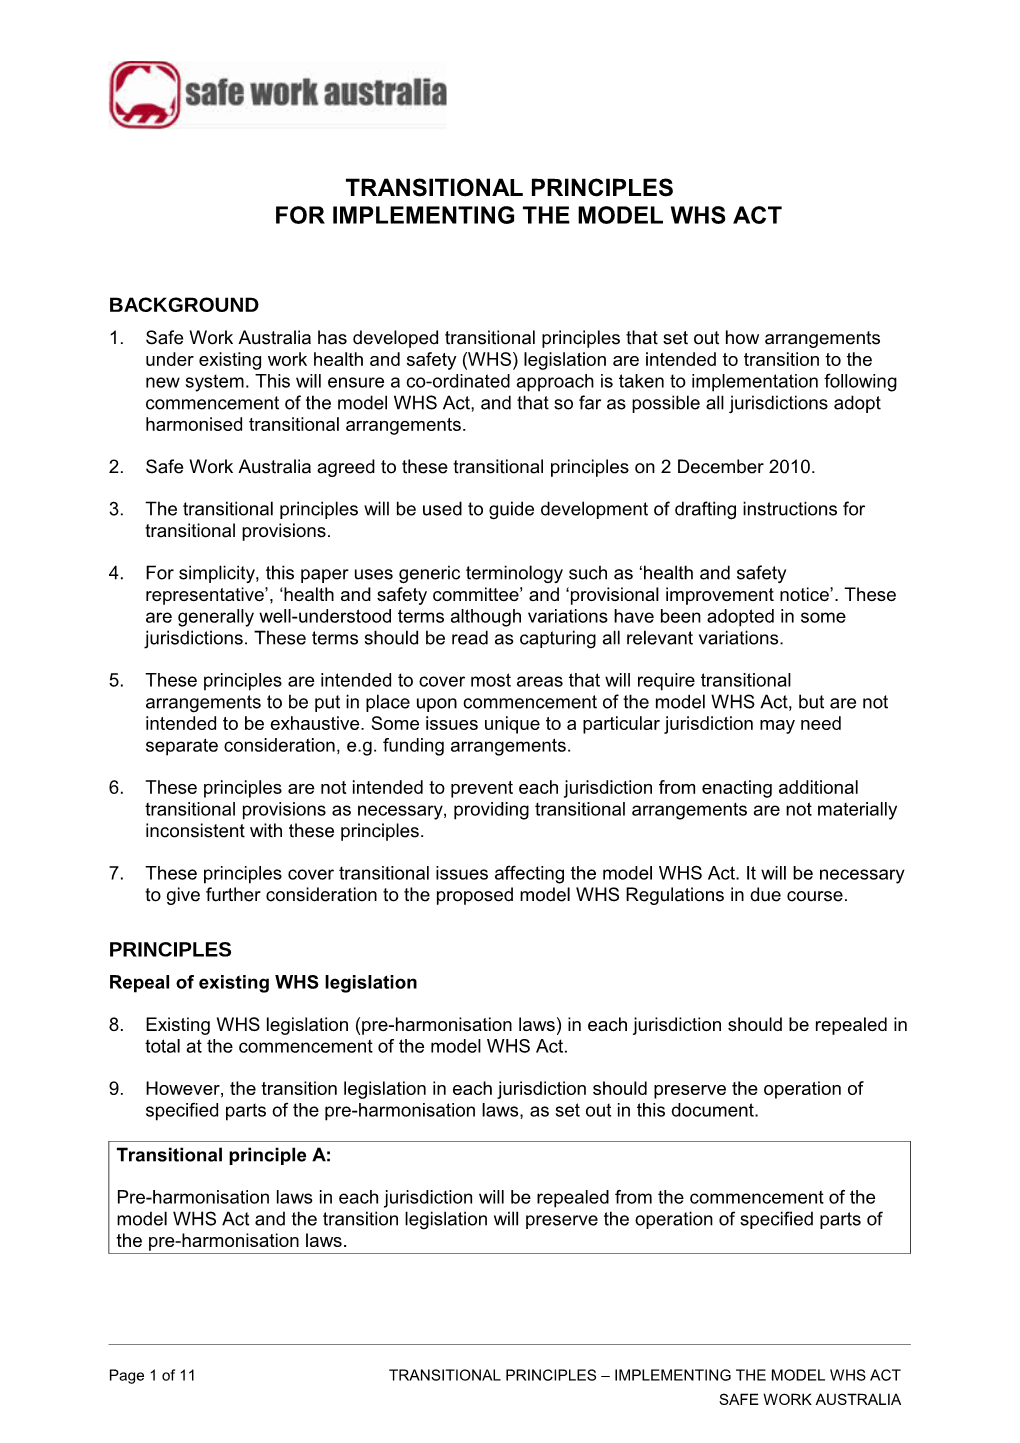 Transitional Principles for Implementing the Model WHS Act